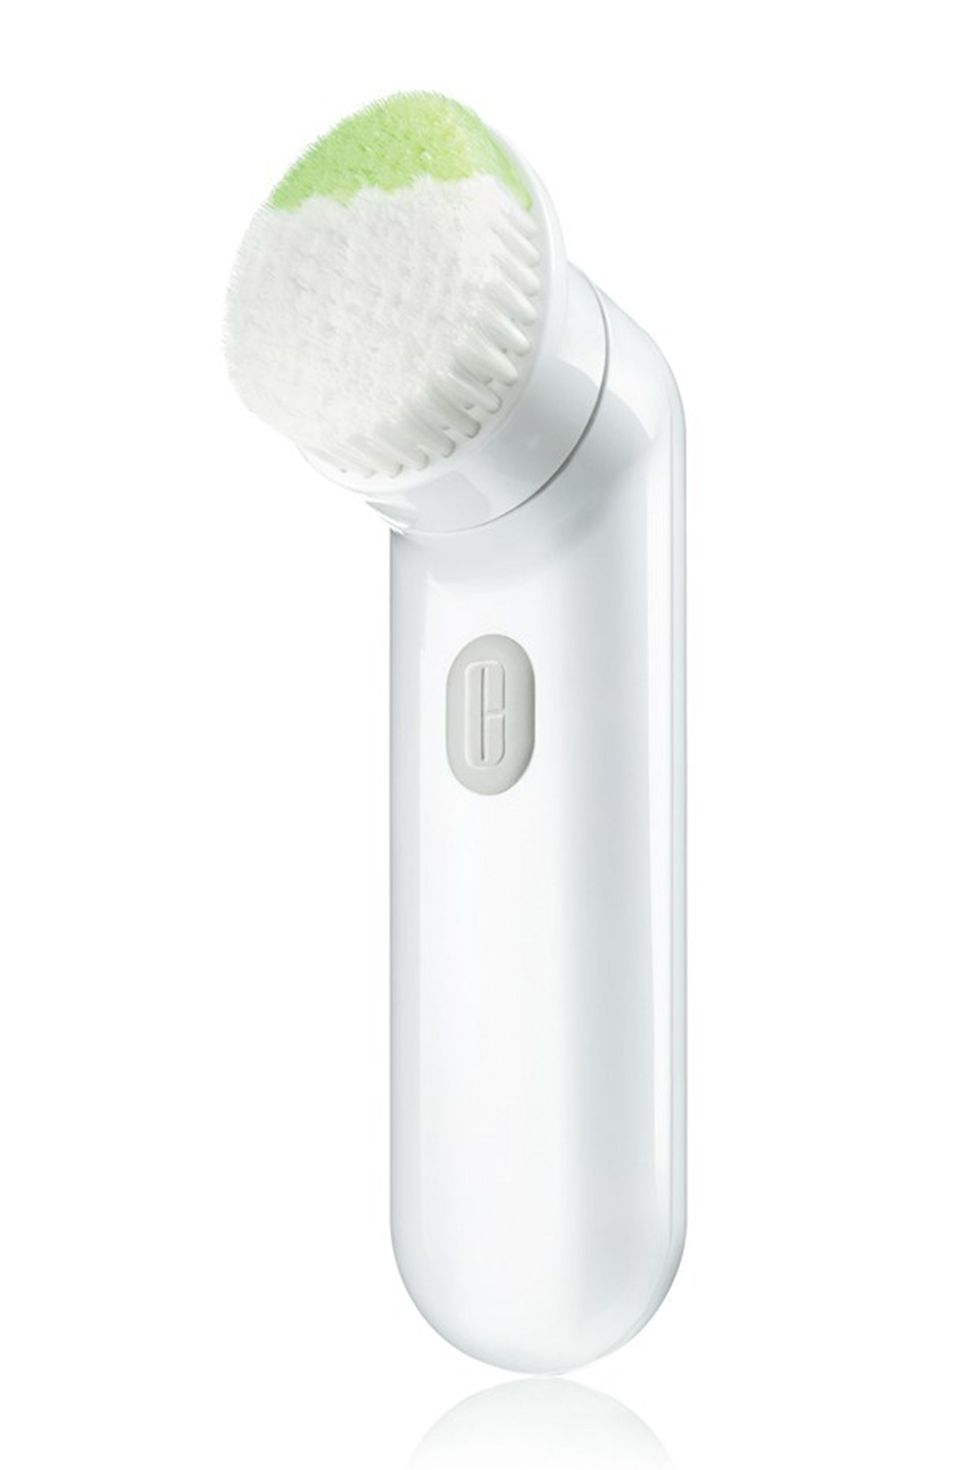 Clinique Sonic Purifying Cleansing Brush